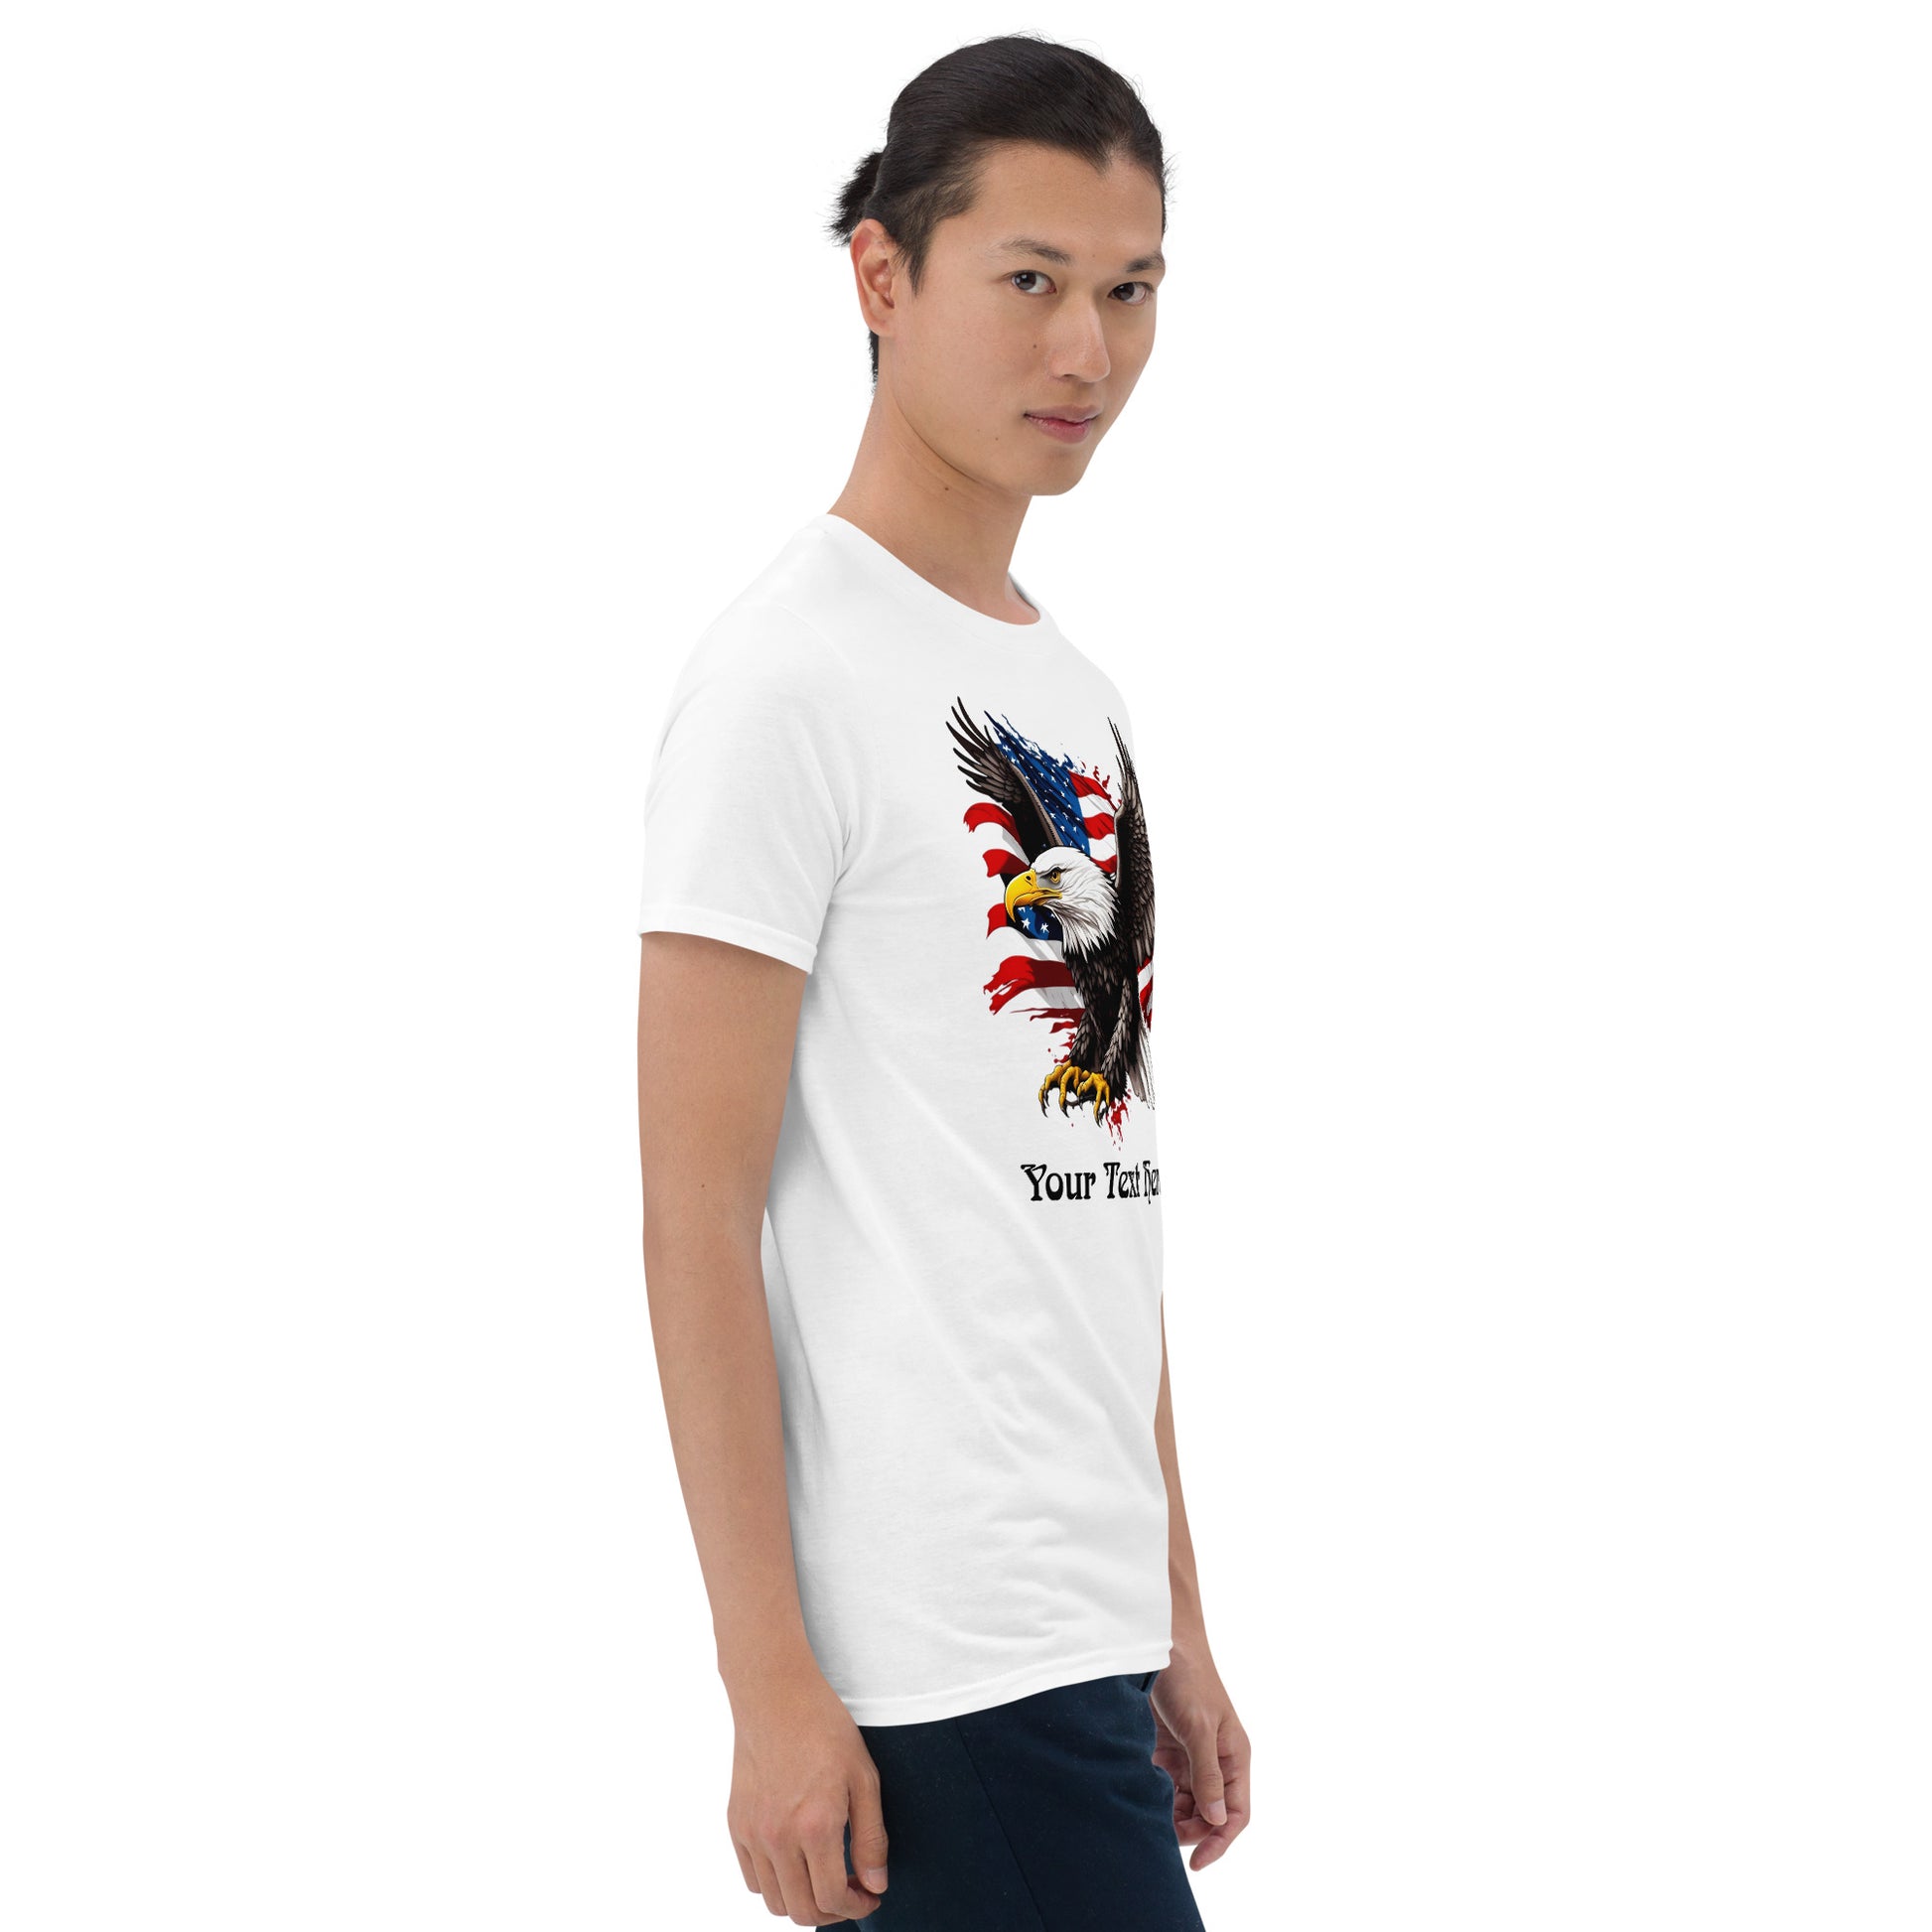 Customizable T Shirt With Eagle Design